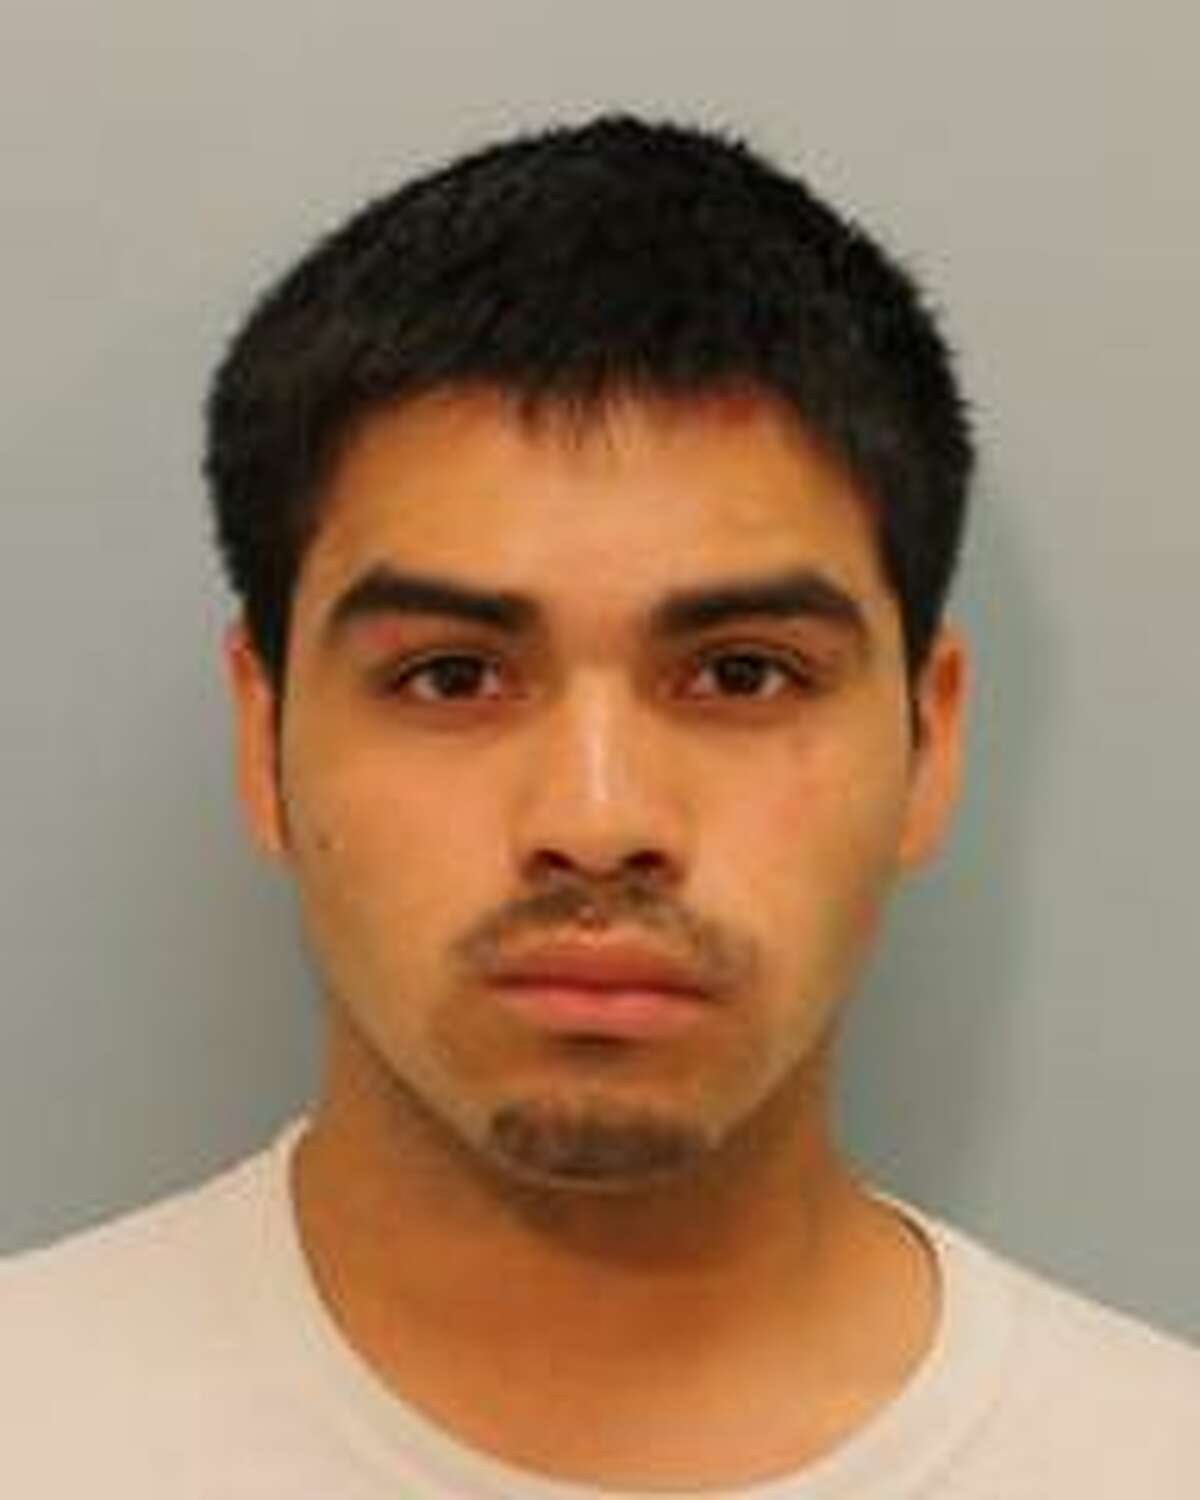 Luis Alonzo Alfaro, 17, is jailed in the fatal stabbing at Spring High School on Wednesday, Sept. 4, 2013.